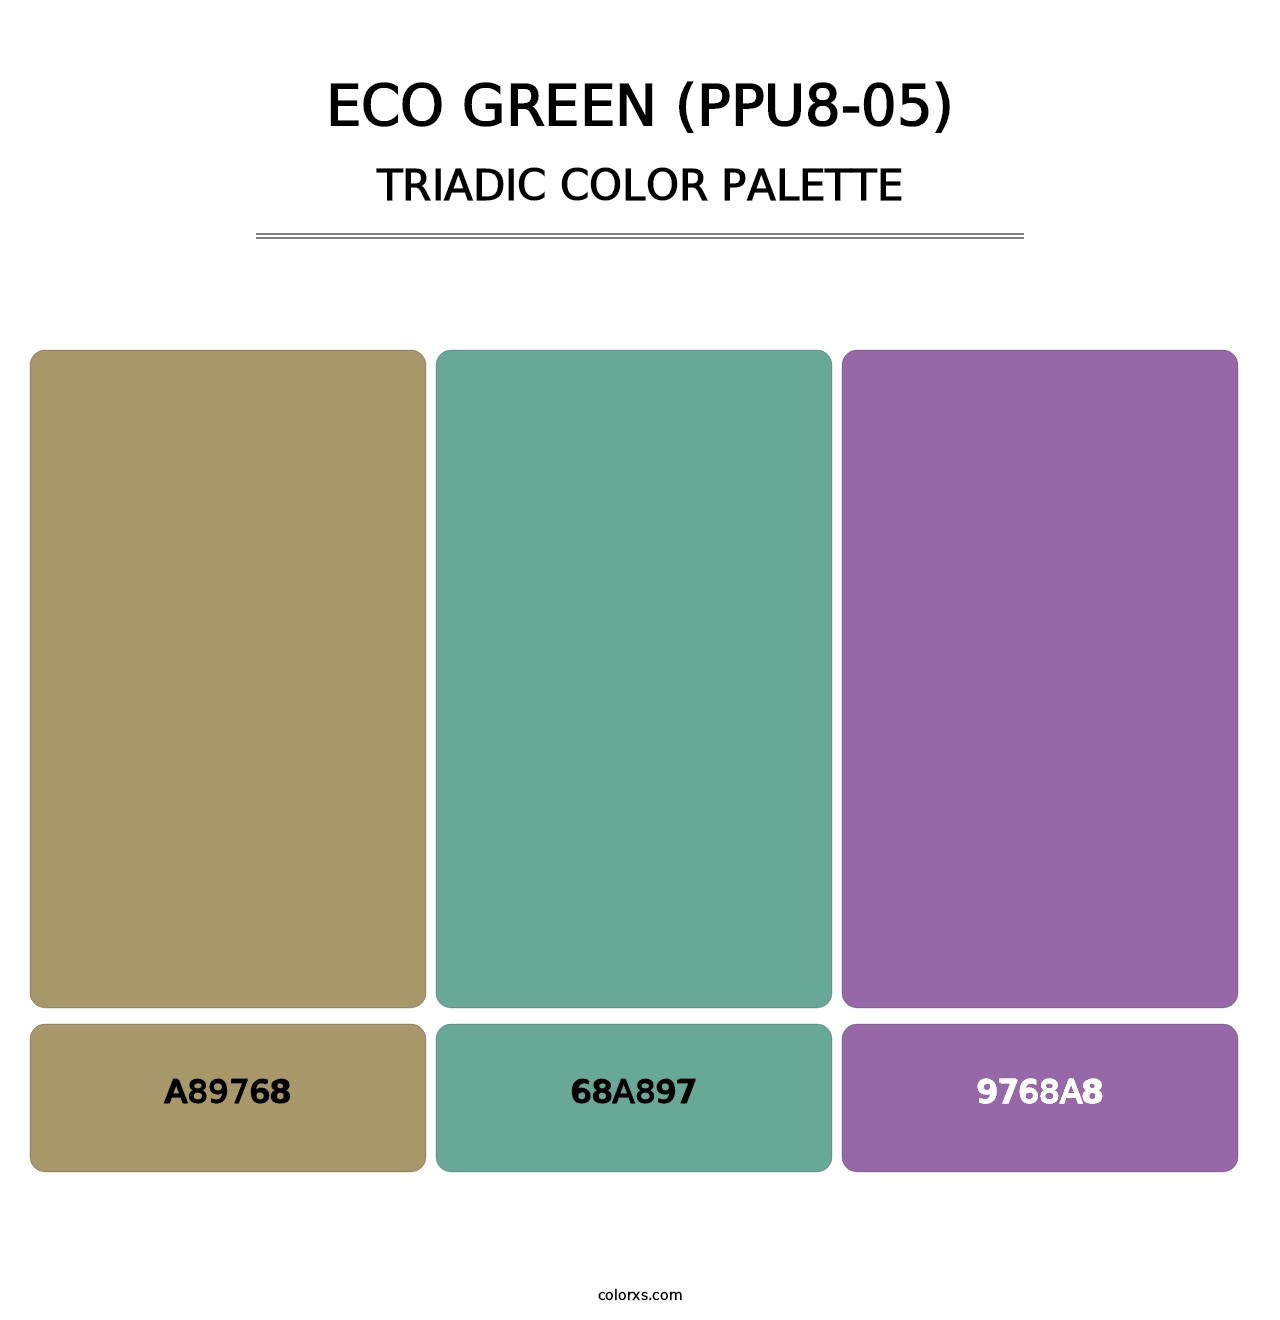 Eco Green (PPU8-05) - Triadic Color Palette